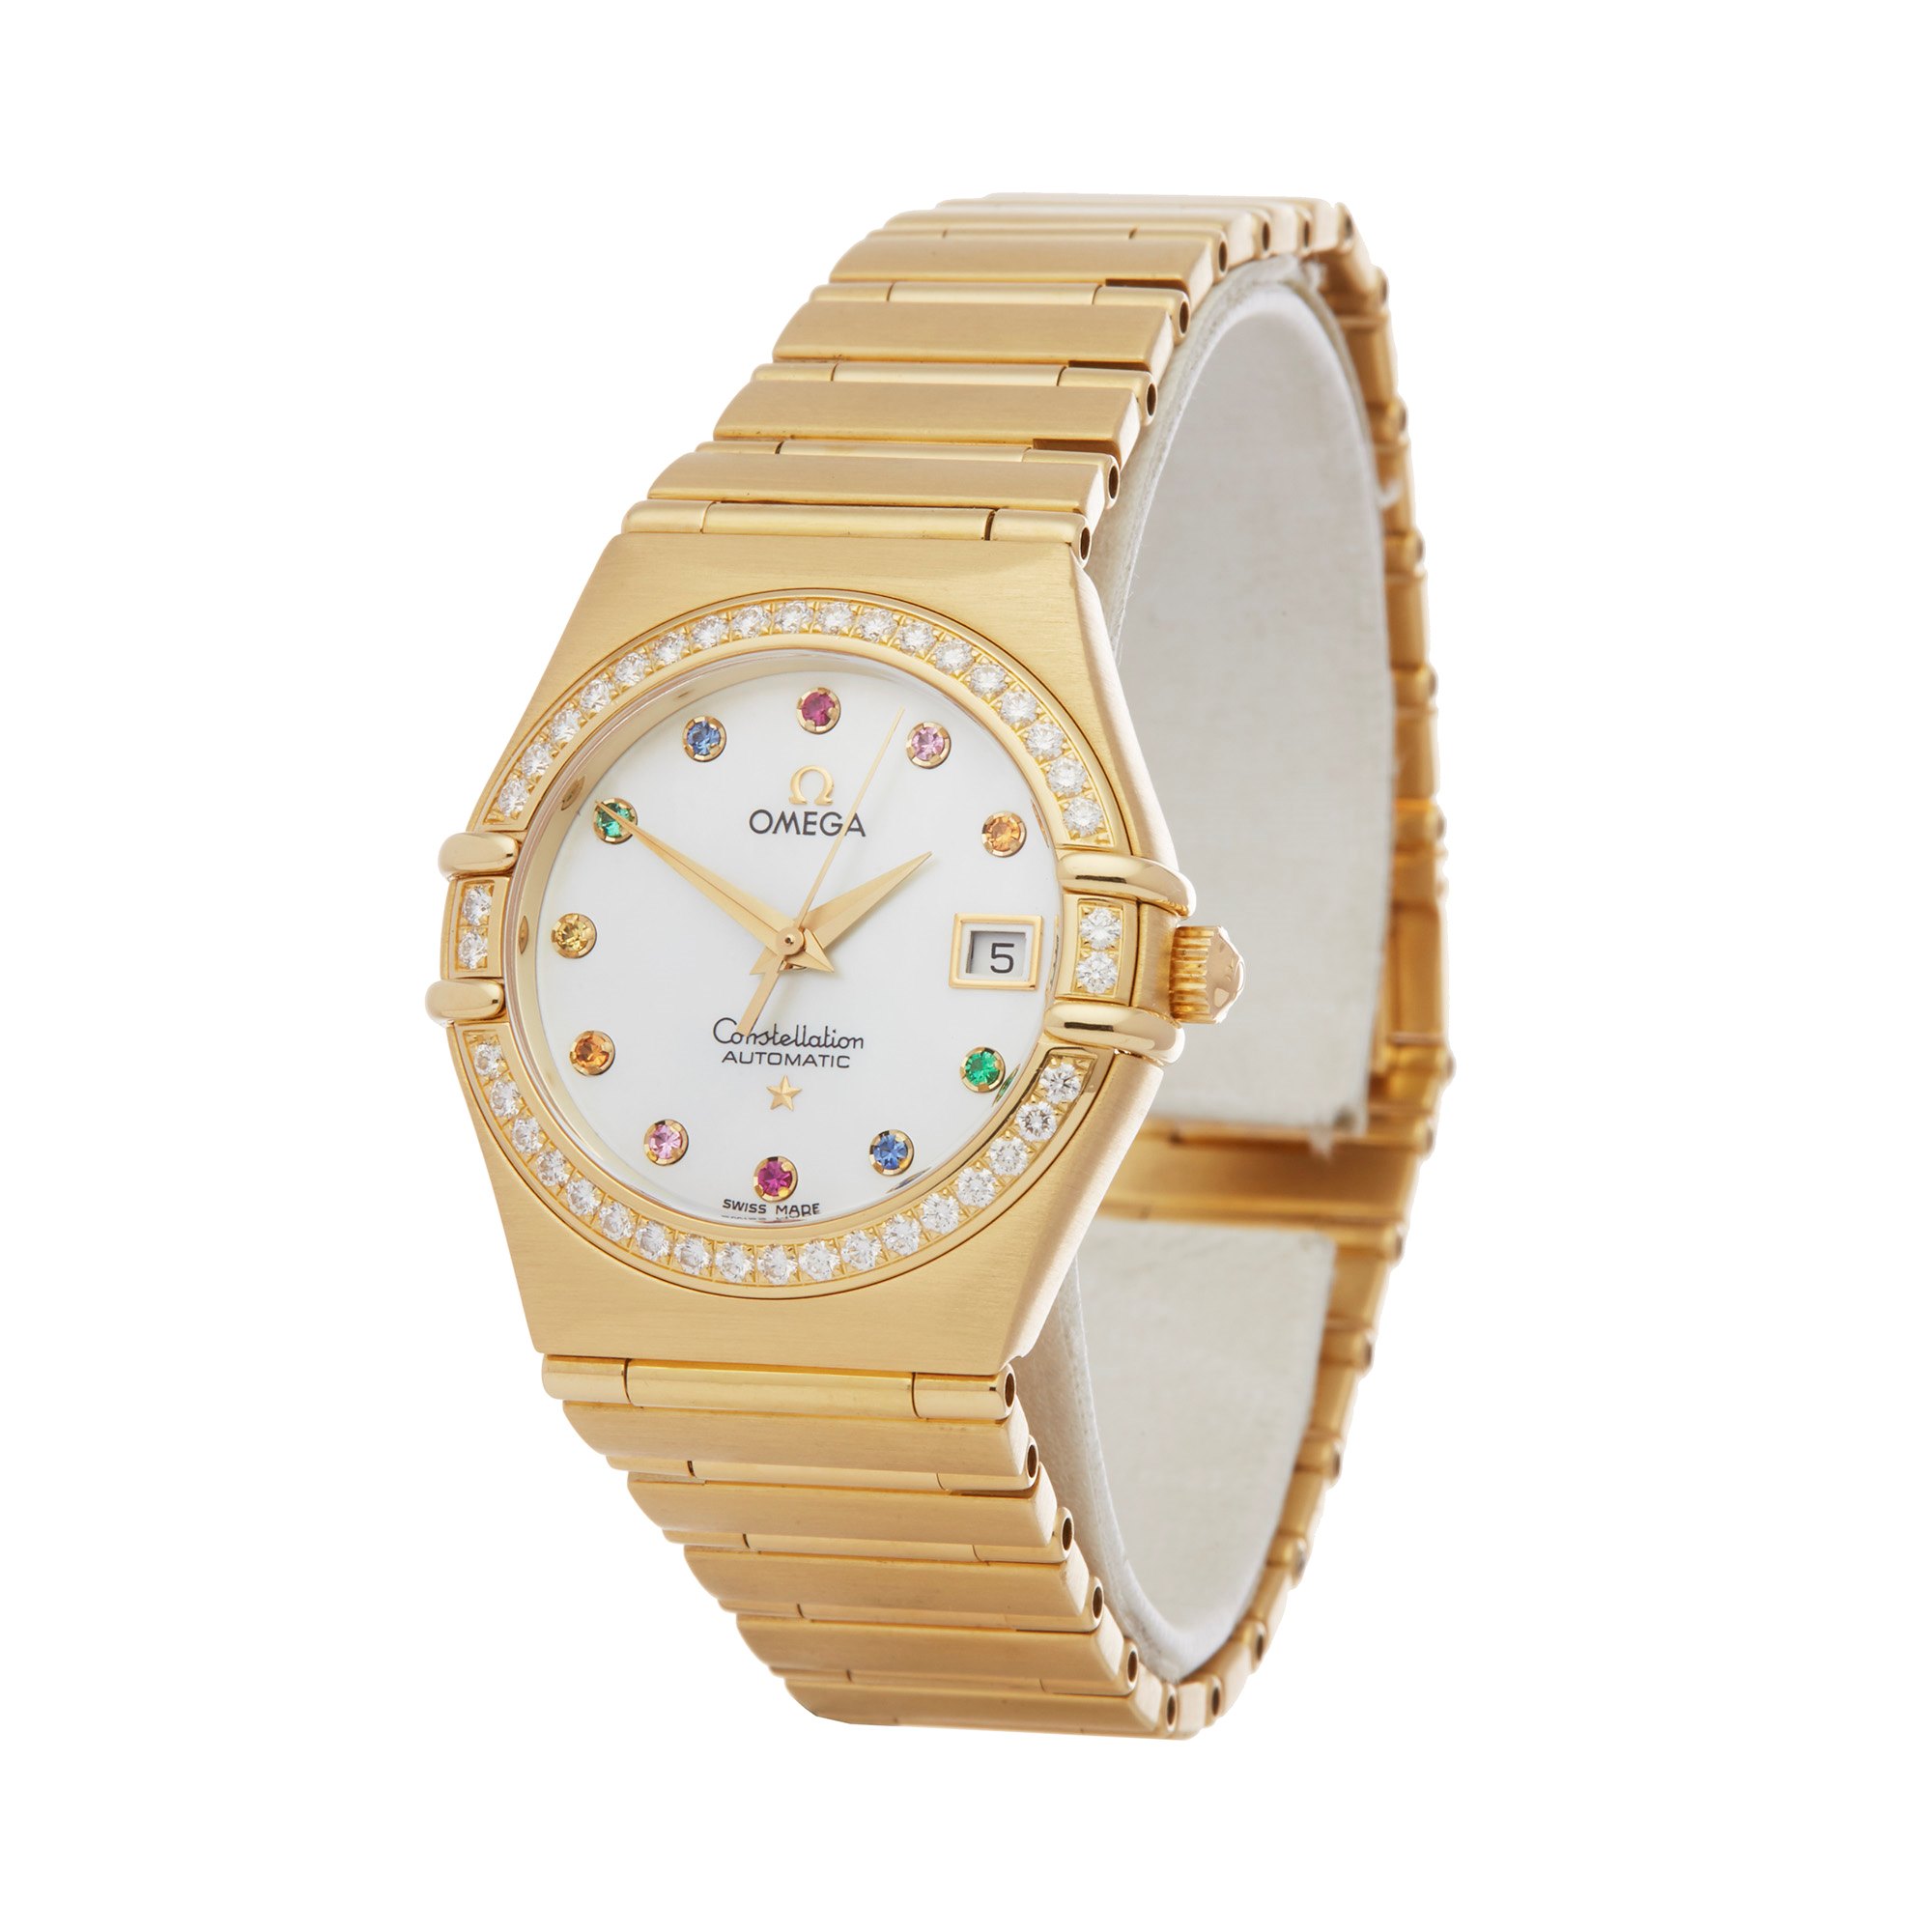 Omega Constellation 1197.79.00 Ladies Yellow Gold Iris Mid Size Automatic Watch - Image 2 of 7